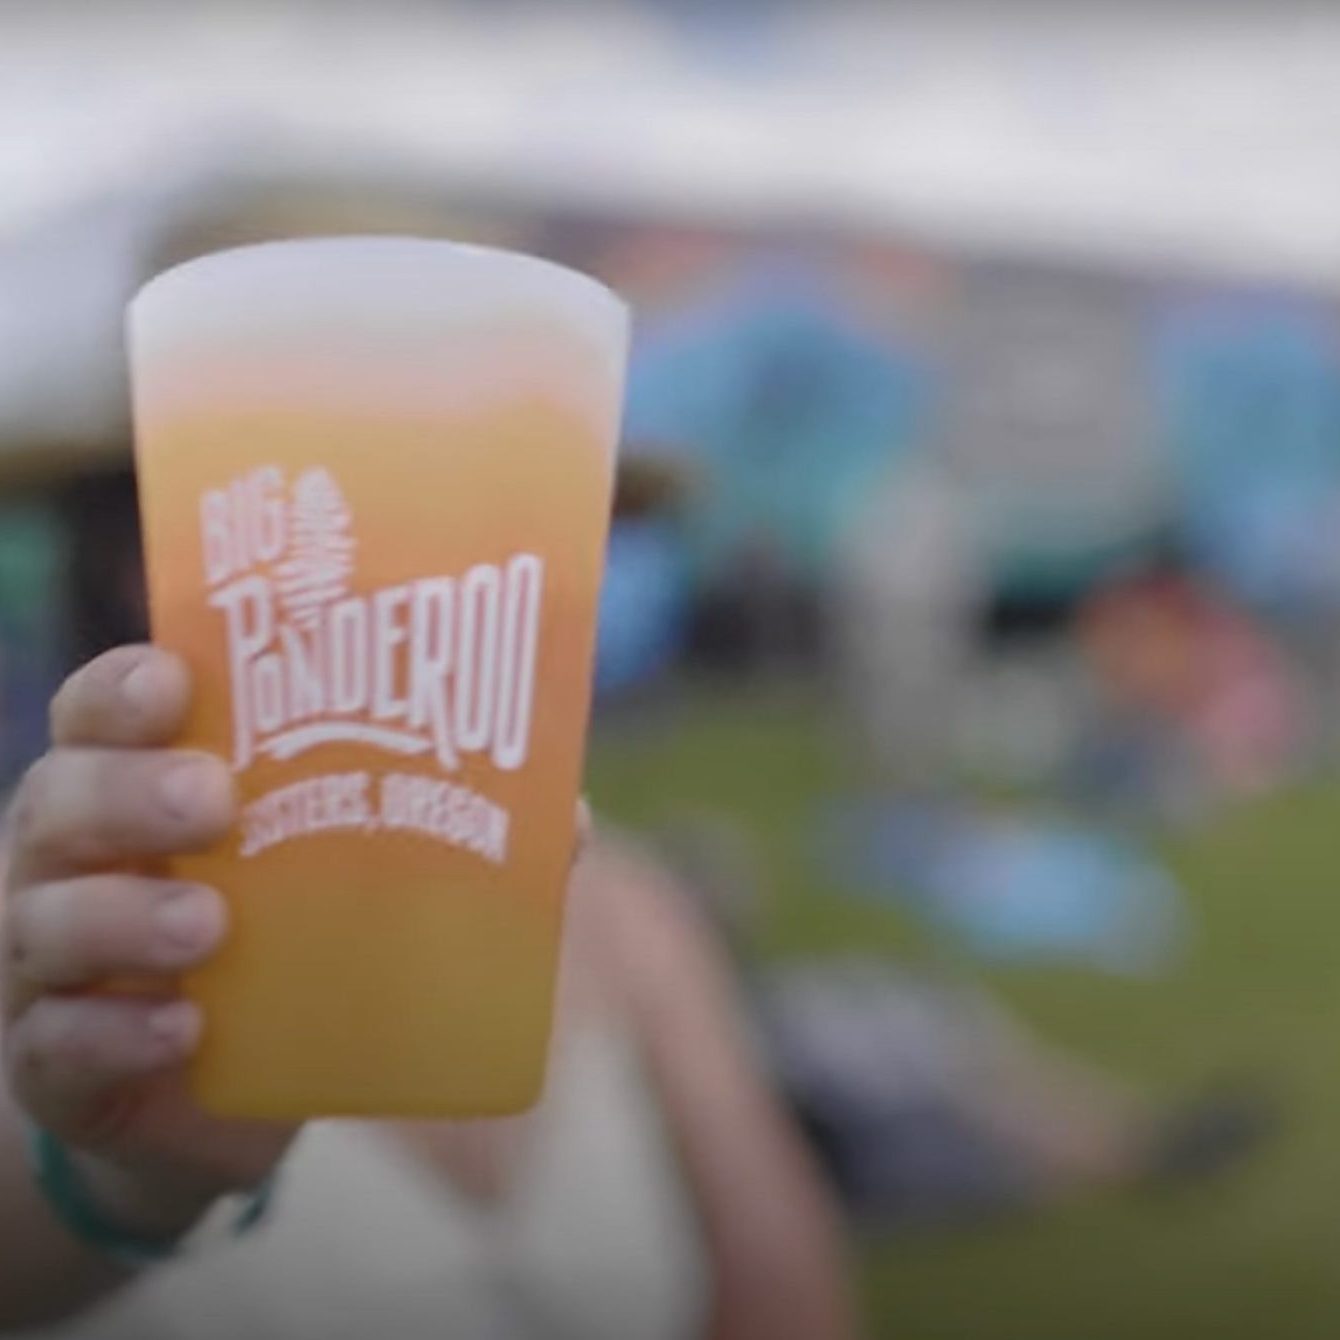 A person holding a Big Ponderoo silicone pint glass with the festival out of focus in the background